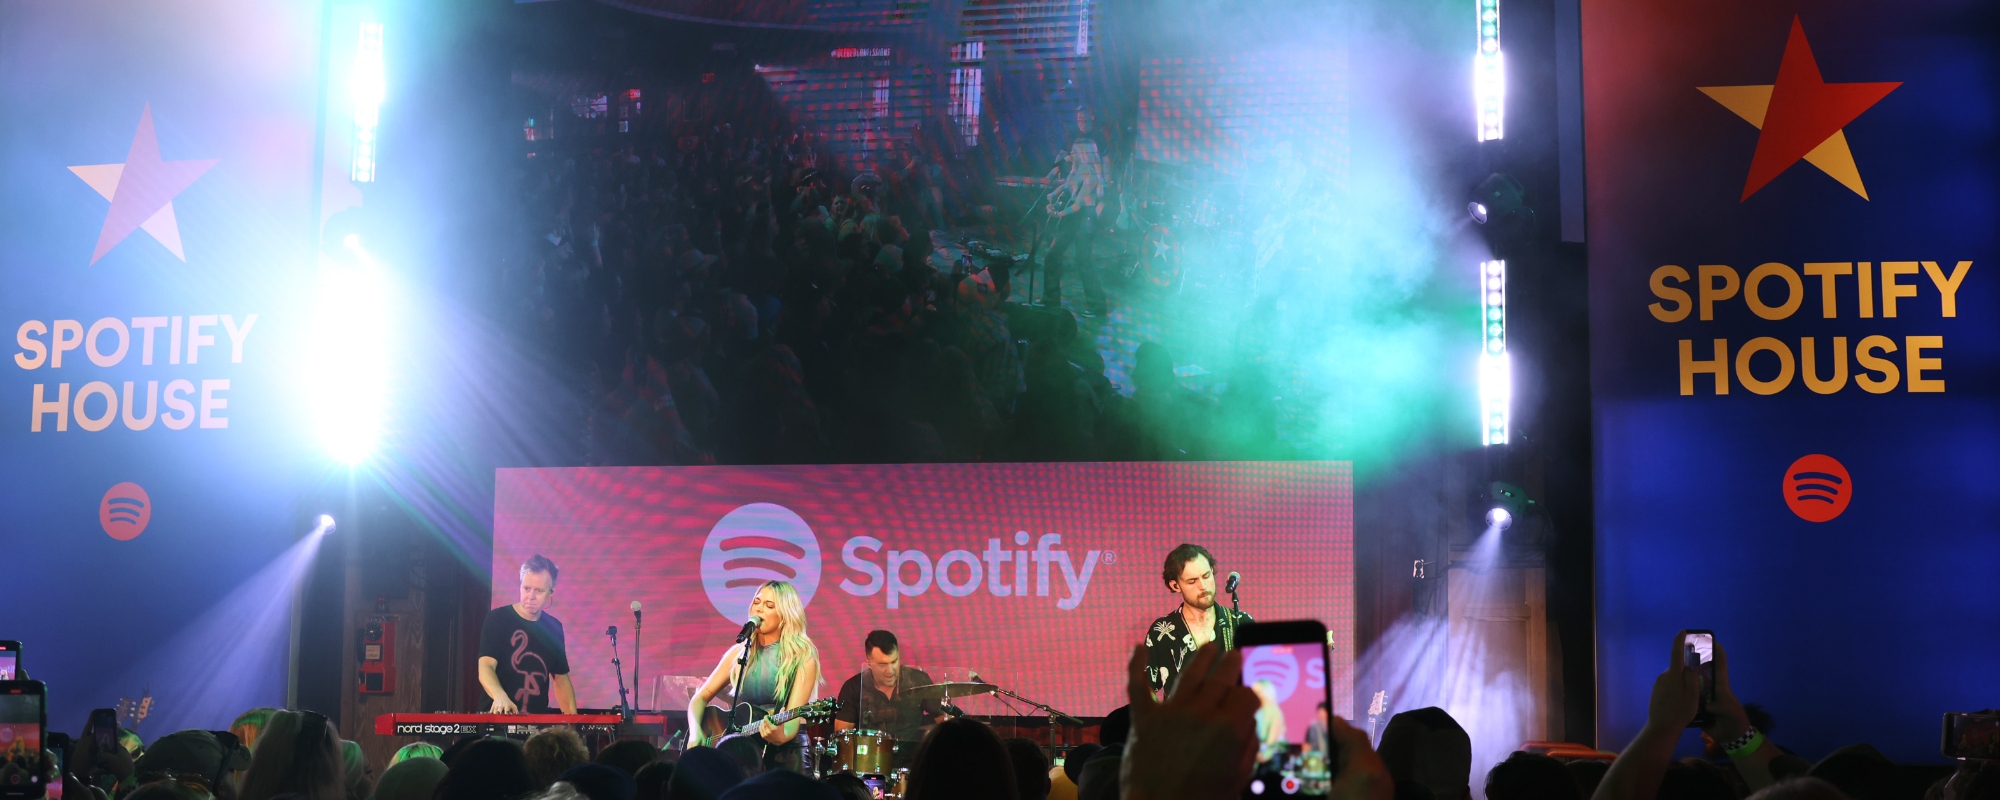 Spotify House Celebrating 5 Years at CMA Fest with Star-Studded Lineup